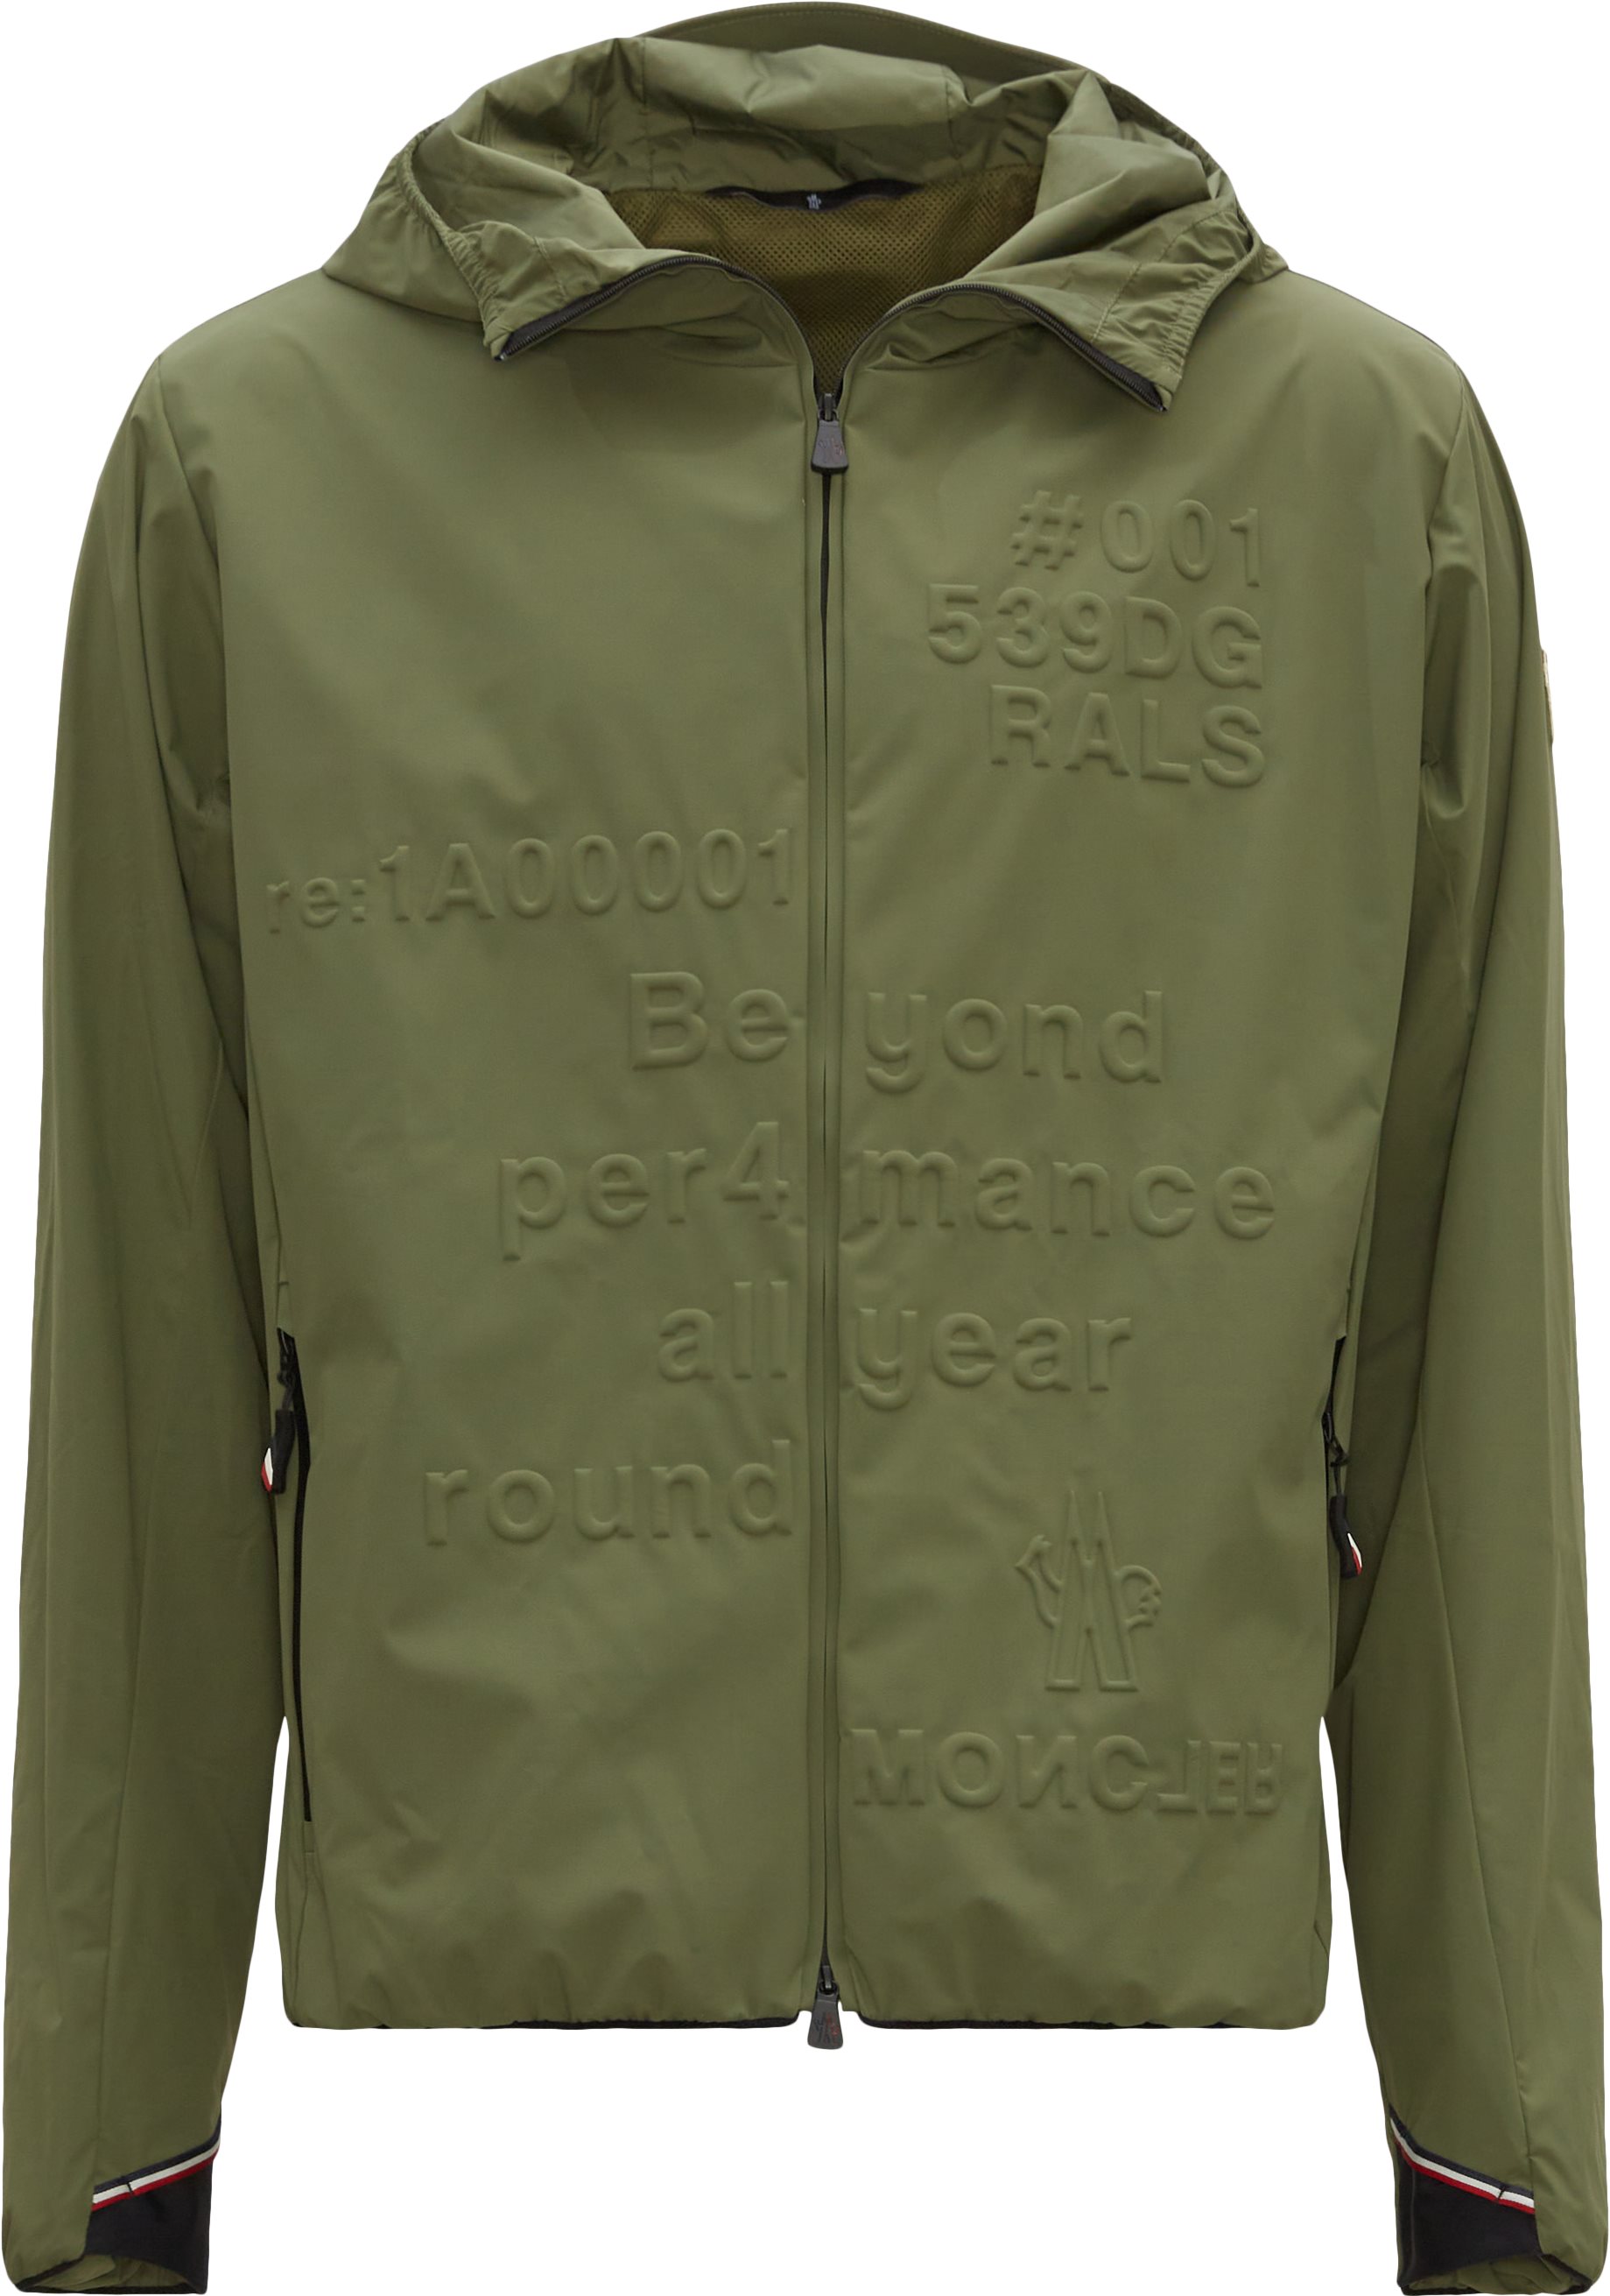 Moncler Grenoble Jackets RALS 1A00001 539DG Army